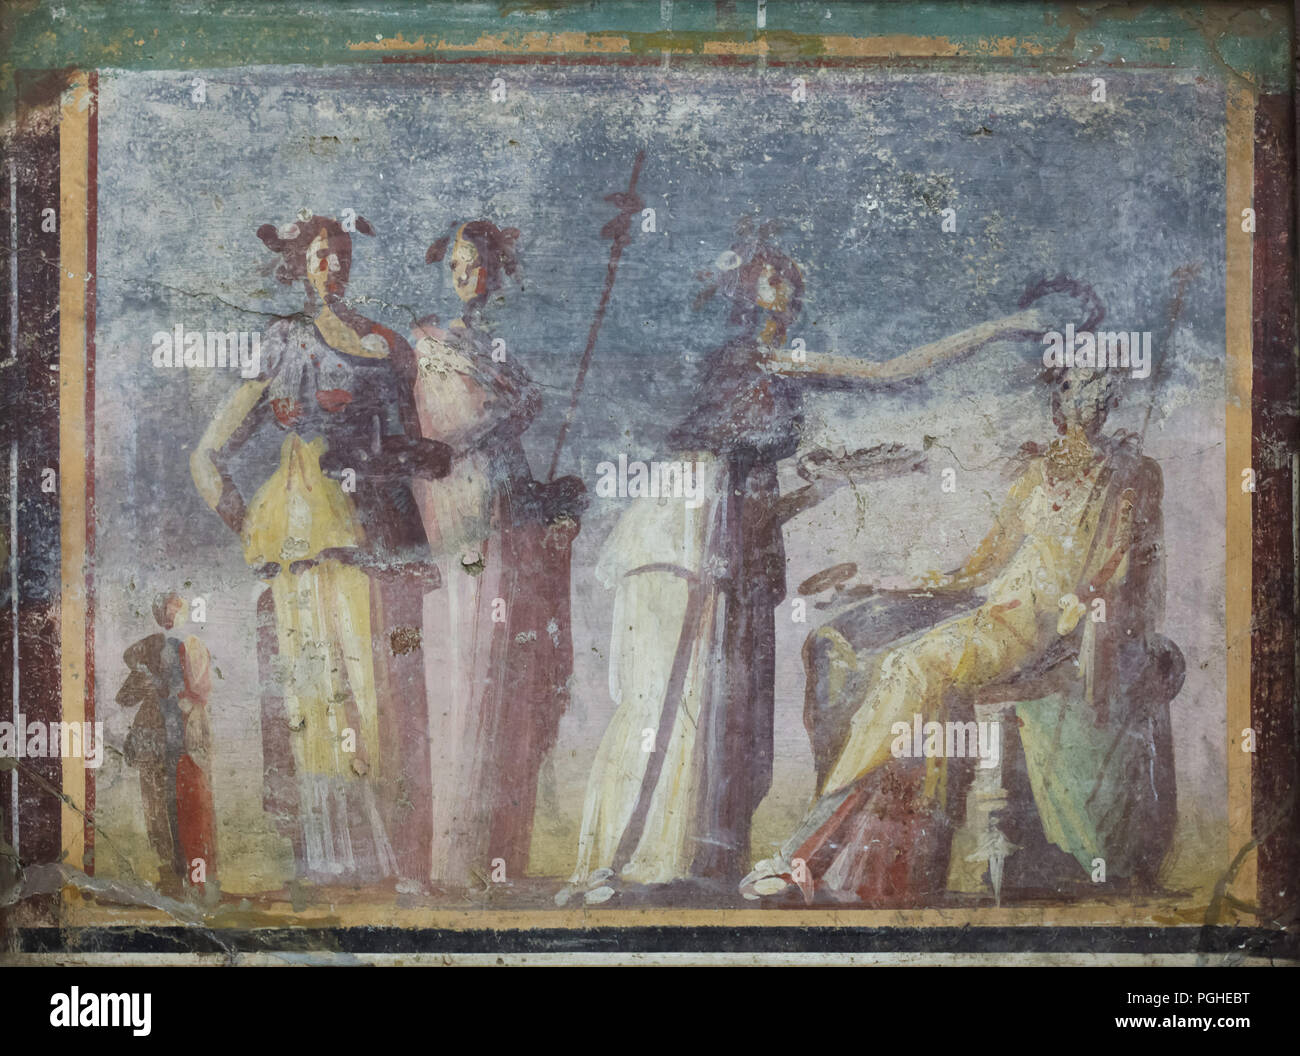 Apollo with nymphs depicted in the Roman fresco dated from the 1st century BC on display in the National Archaeological Museum (Museo Archeologico Nazionale di Napoli) in Naples, Campania, Italy. Stock Photo